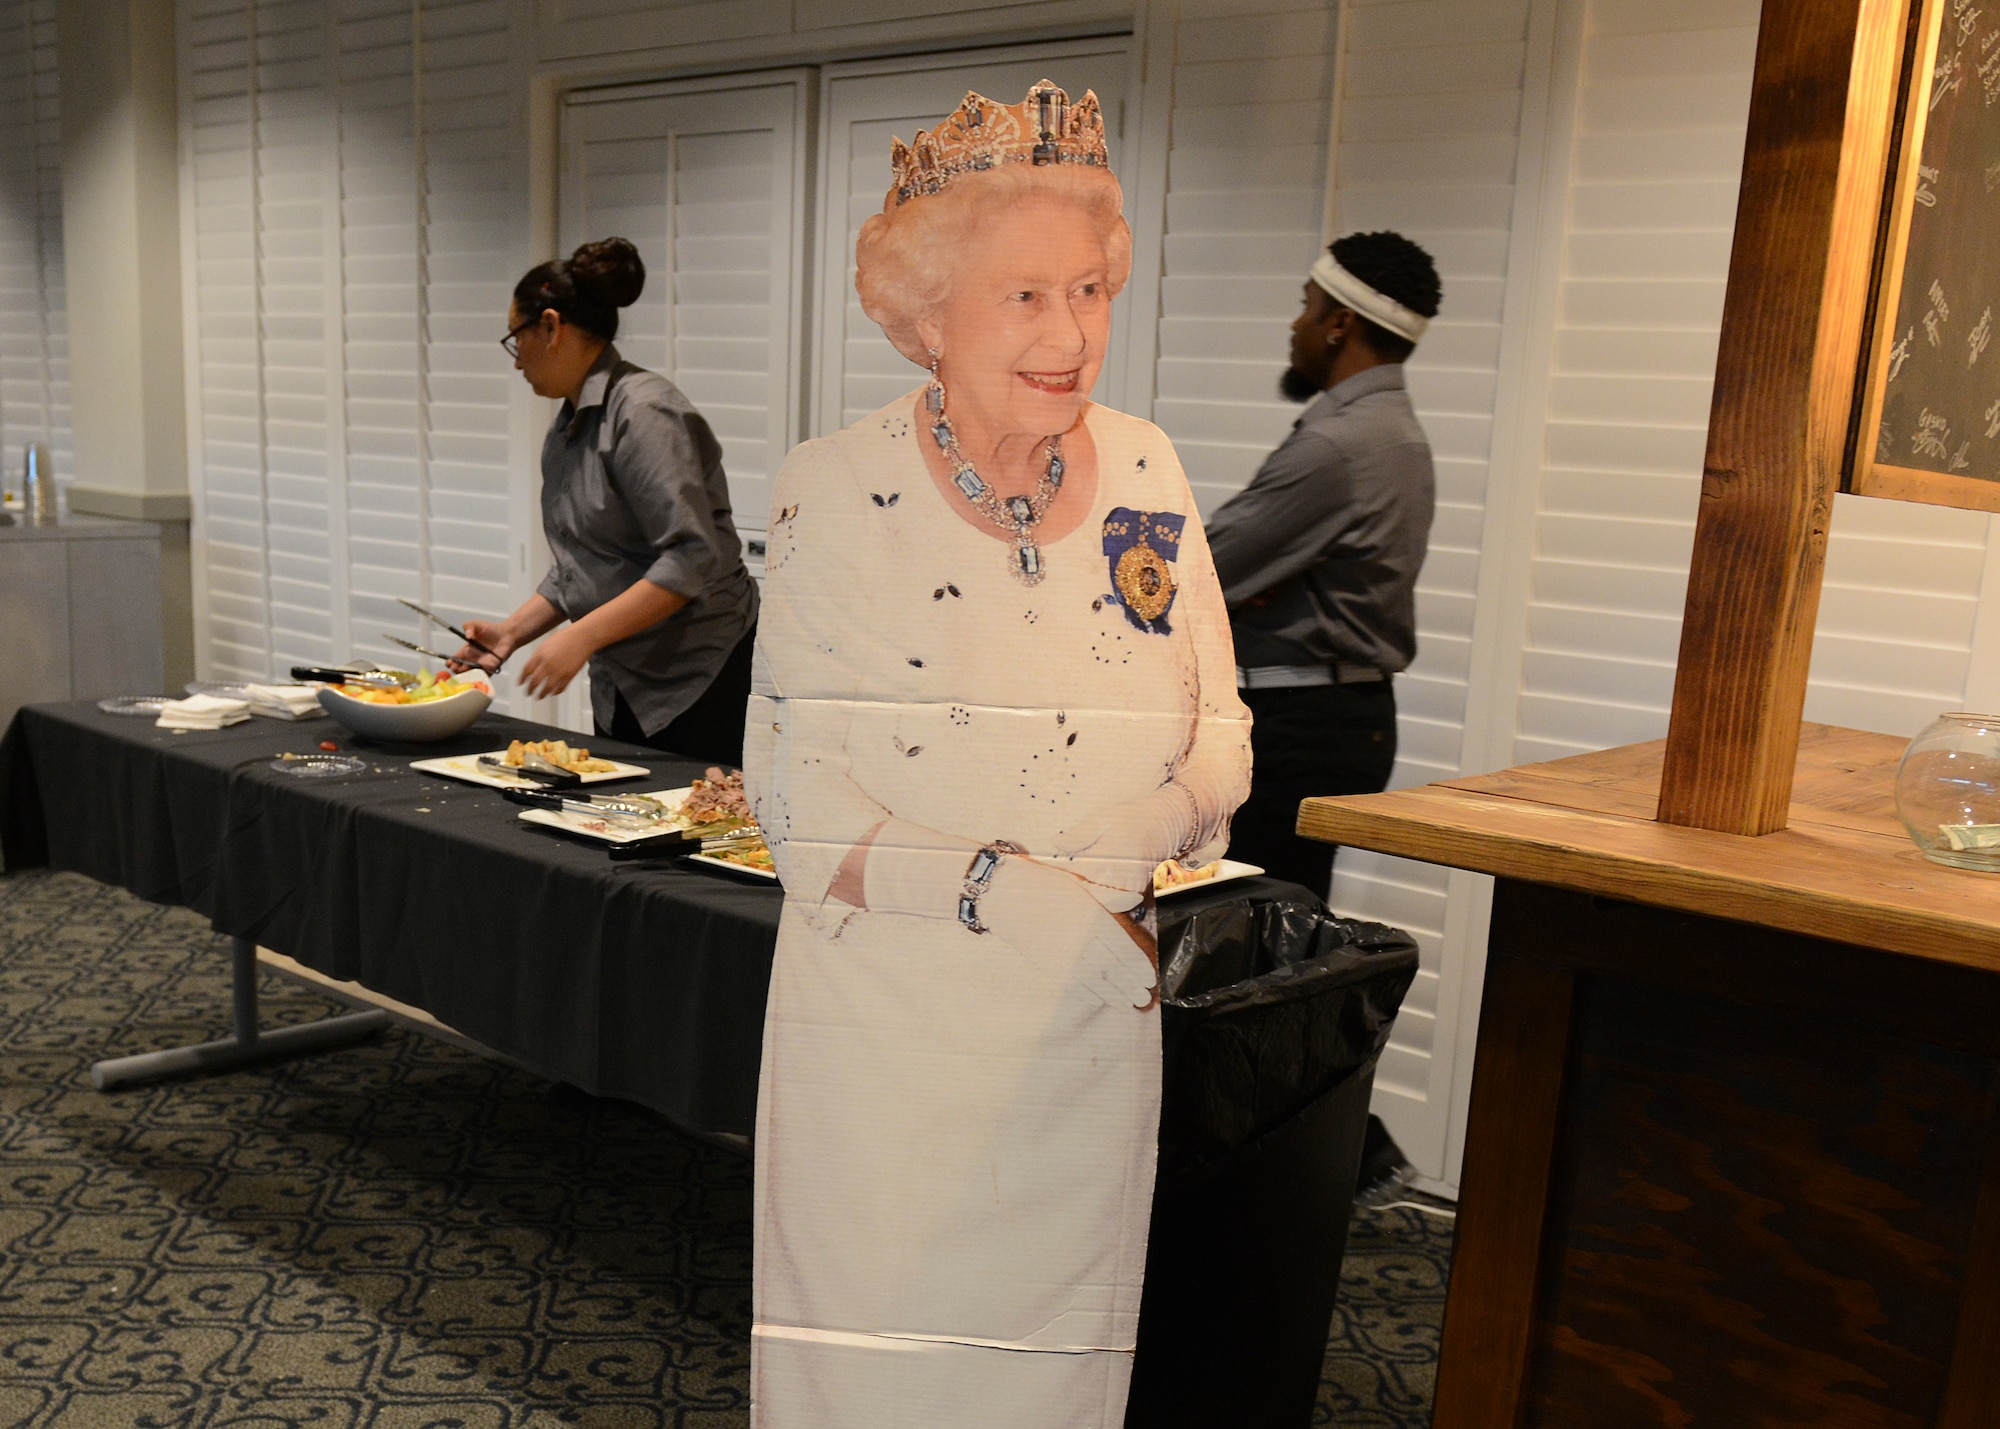 Edwards Air Force Base's Battle of Britain celebration was attended by Quenn Elizabeth II herself. To be more accurate, a figure of her likeness was in attendence to help bring the feeling of Britain home to Edwards Nov. 9 at Club Muroc. (U.S. Air Force photo by Kenji Thuloweit)